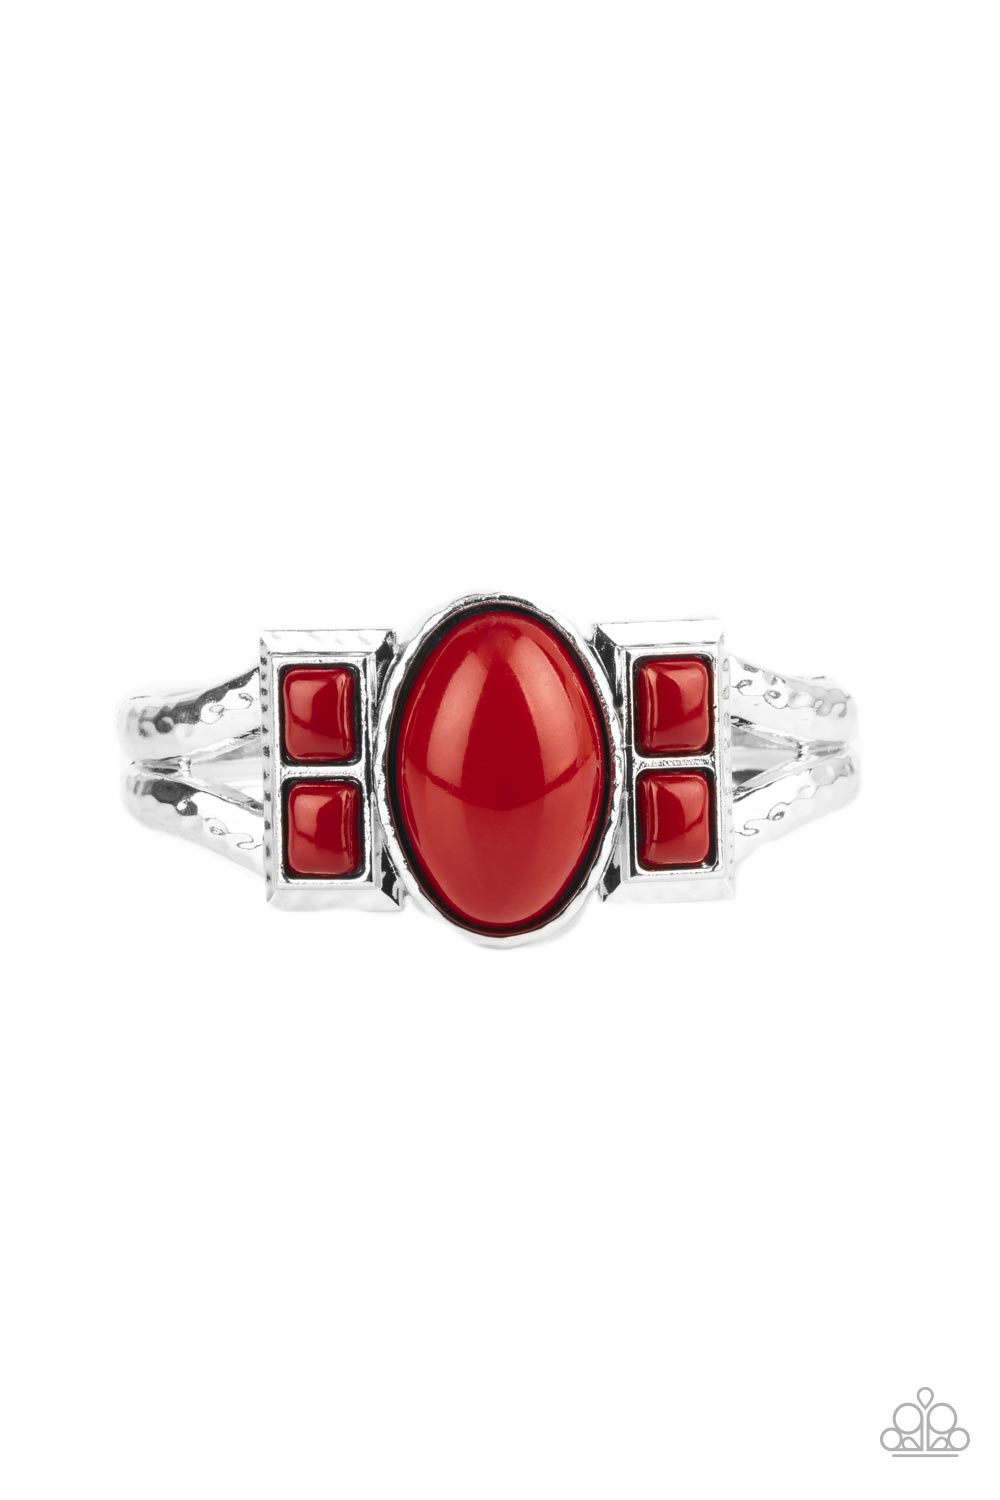 A Touch of Tiki - Red and Silver Hinged Bracelet